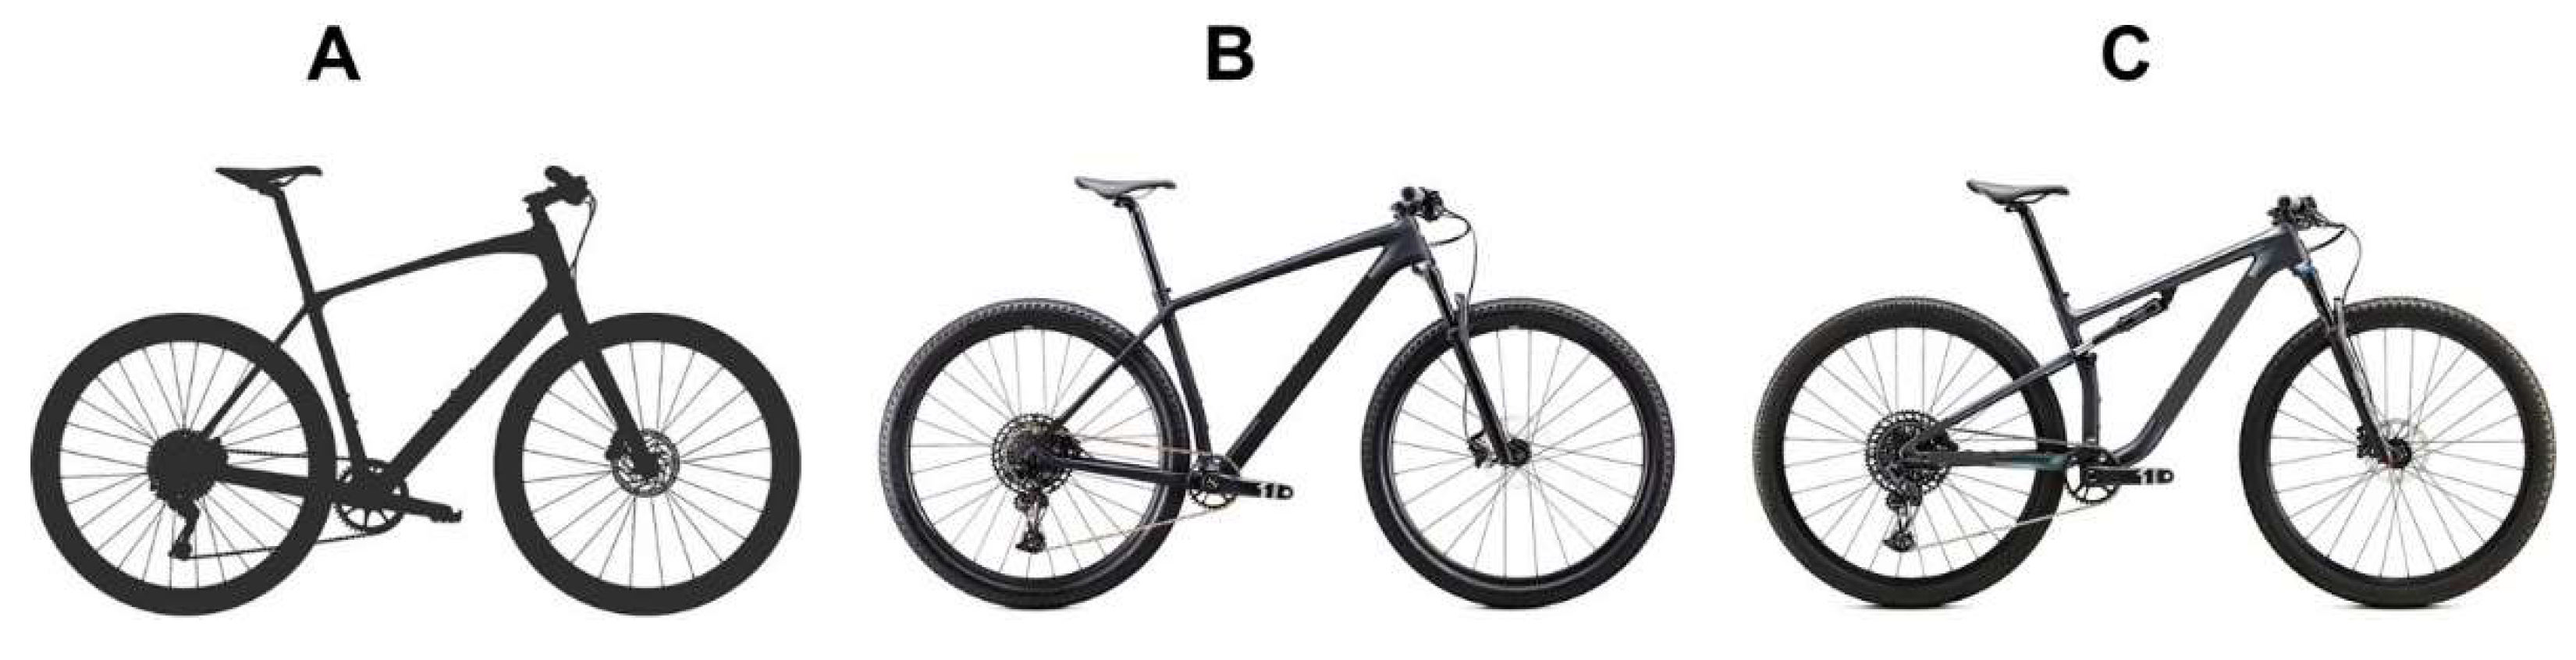 IJERPH Free Full-Text Current Perspectives of Cross-Country Mountain Biking Physiological and Mechanical Aspects, Evolution of Bikes, Accidents and Injuries